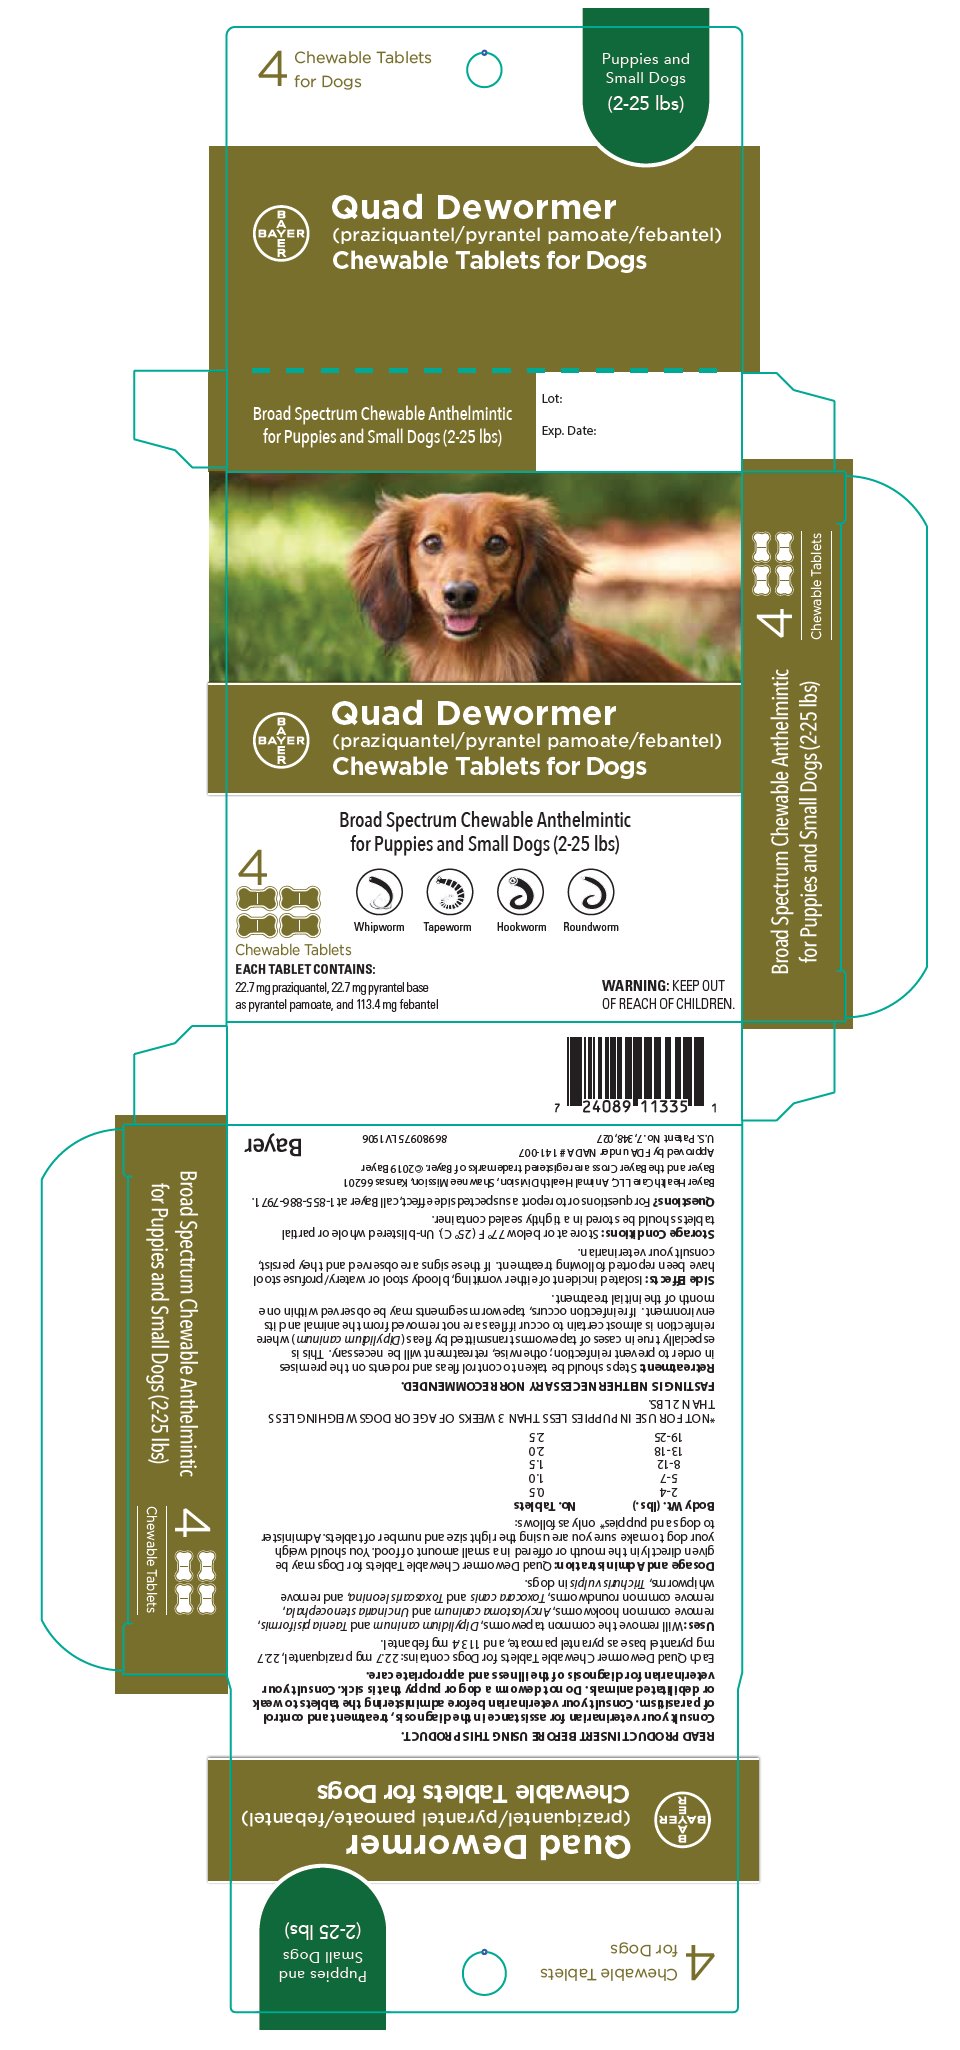 Quad Dewormer (praziquantel/pyrantel pamoate/febantel) Chewable Tablets for Dogs label - puppies and small dogs (2-25 lbs)